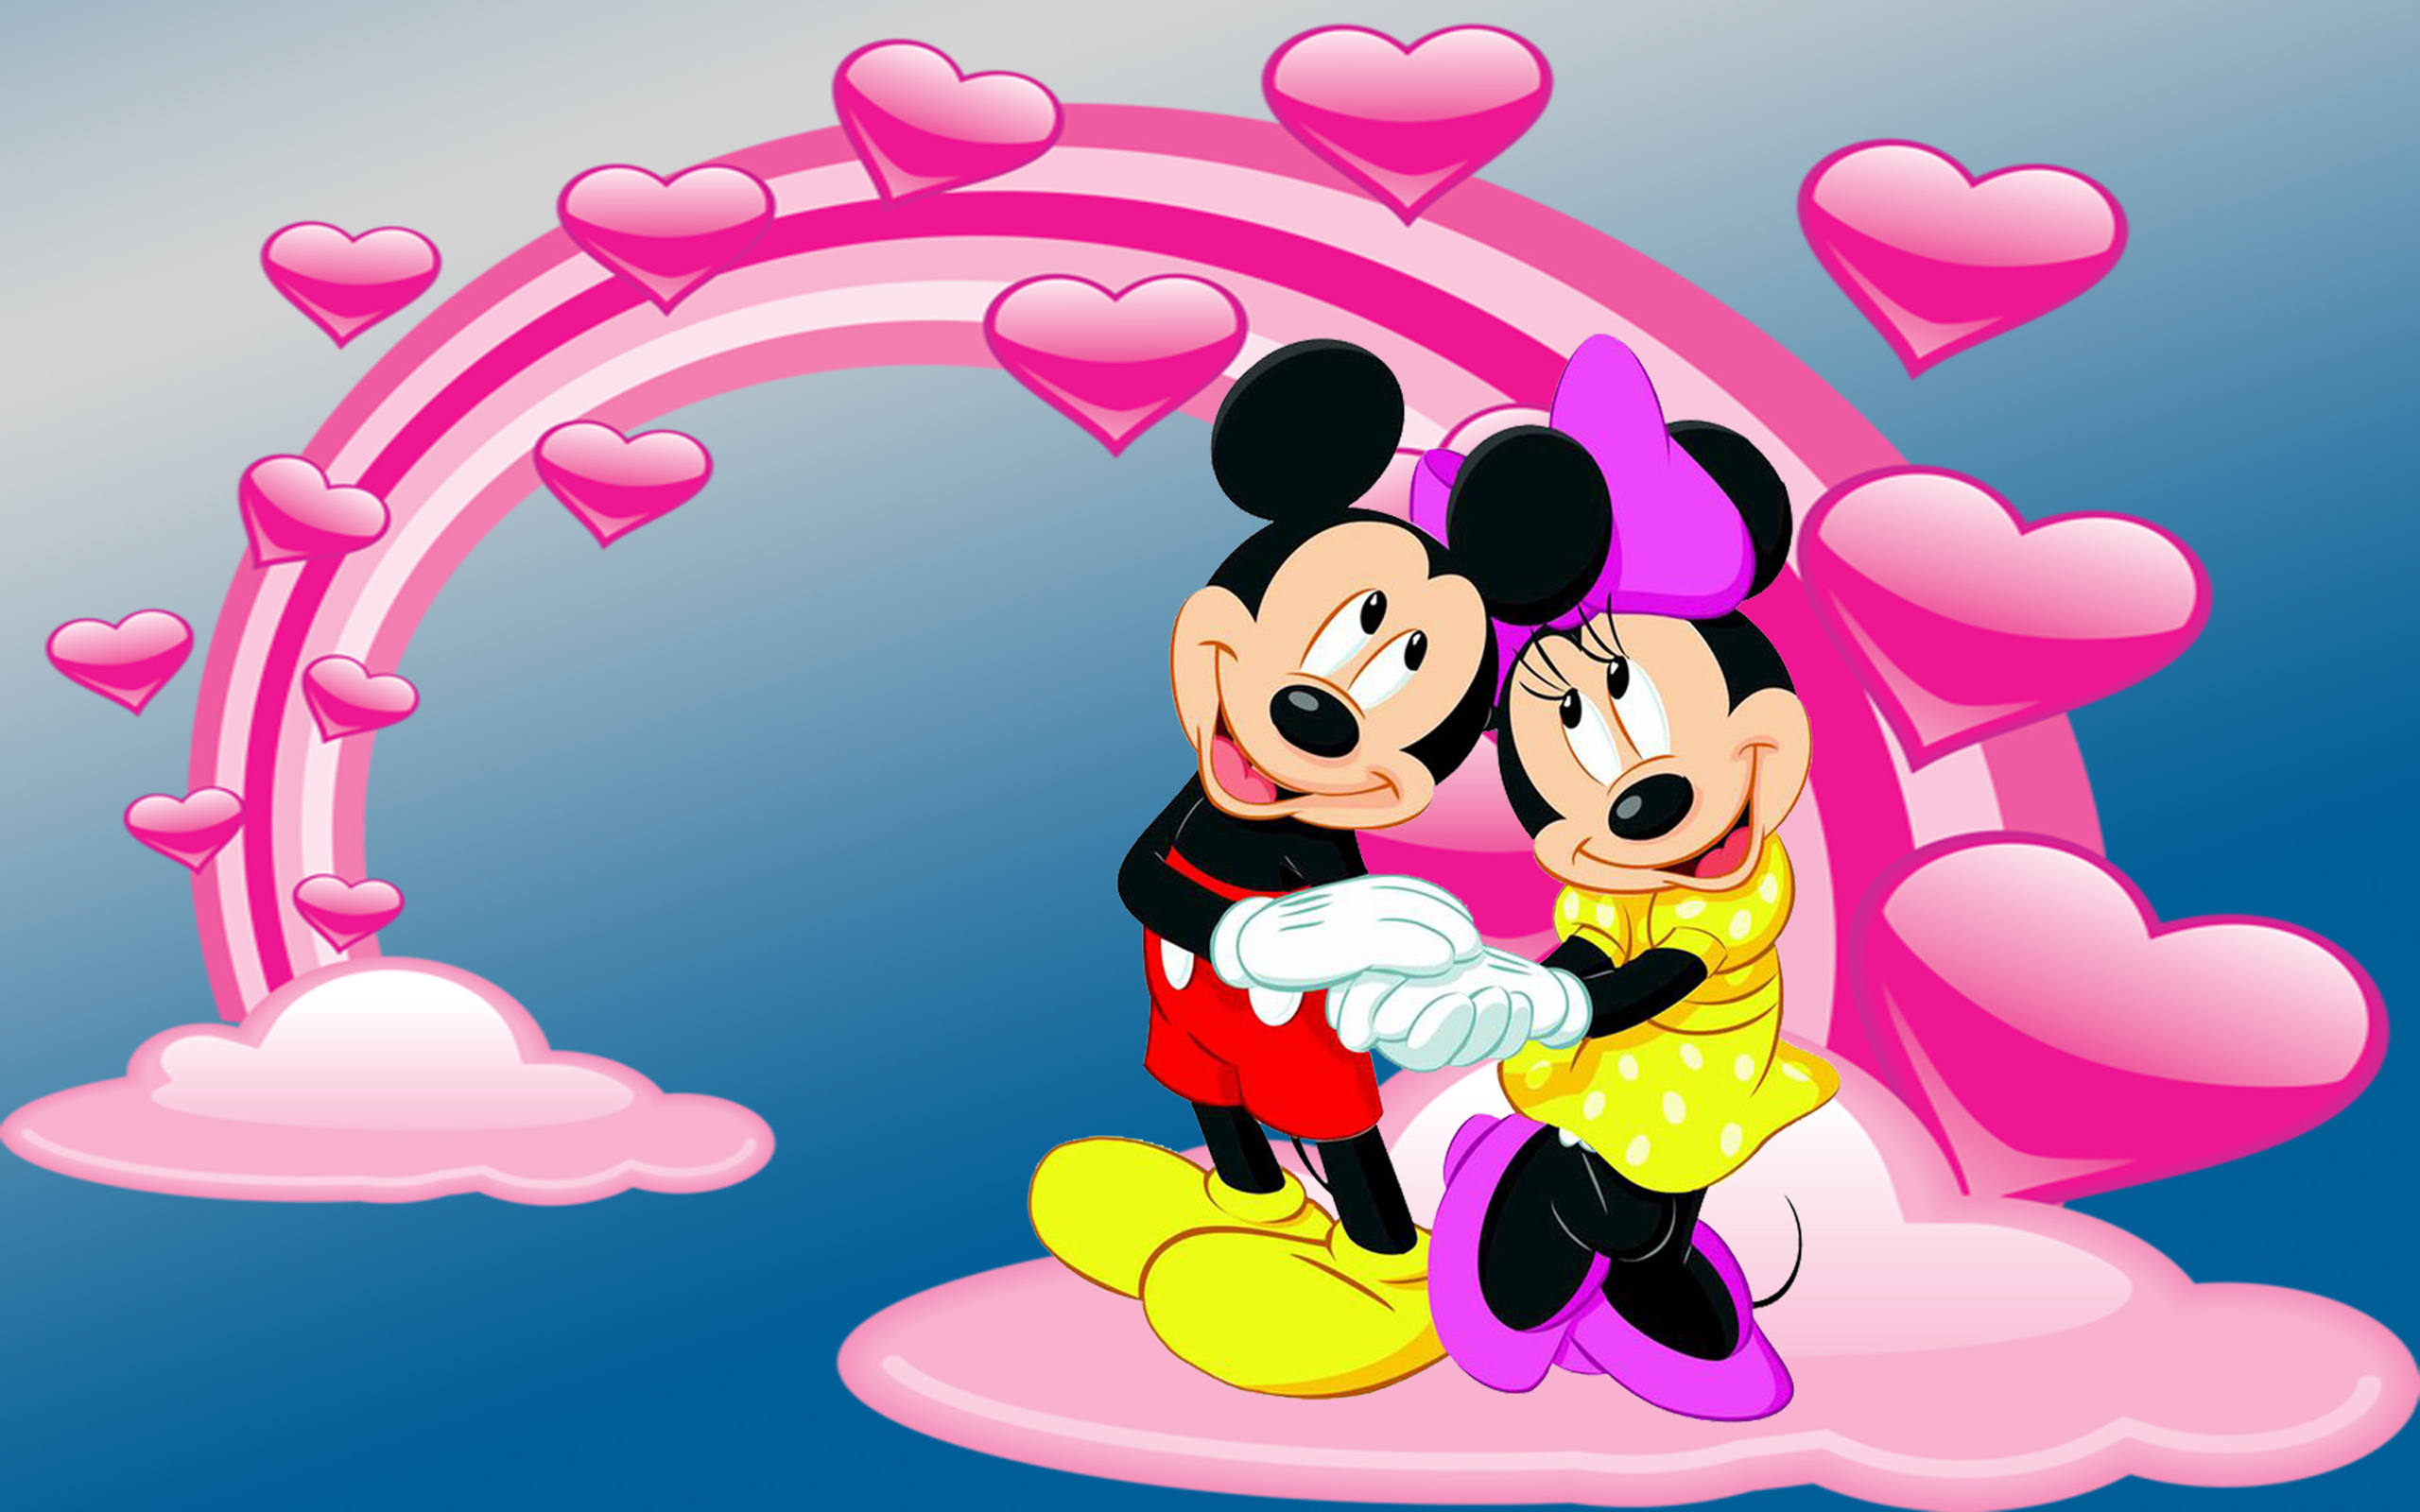 Mickey And Minnie Mouse Wallpaper Hd - HD Wallpaper 